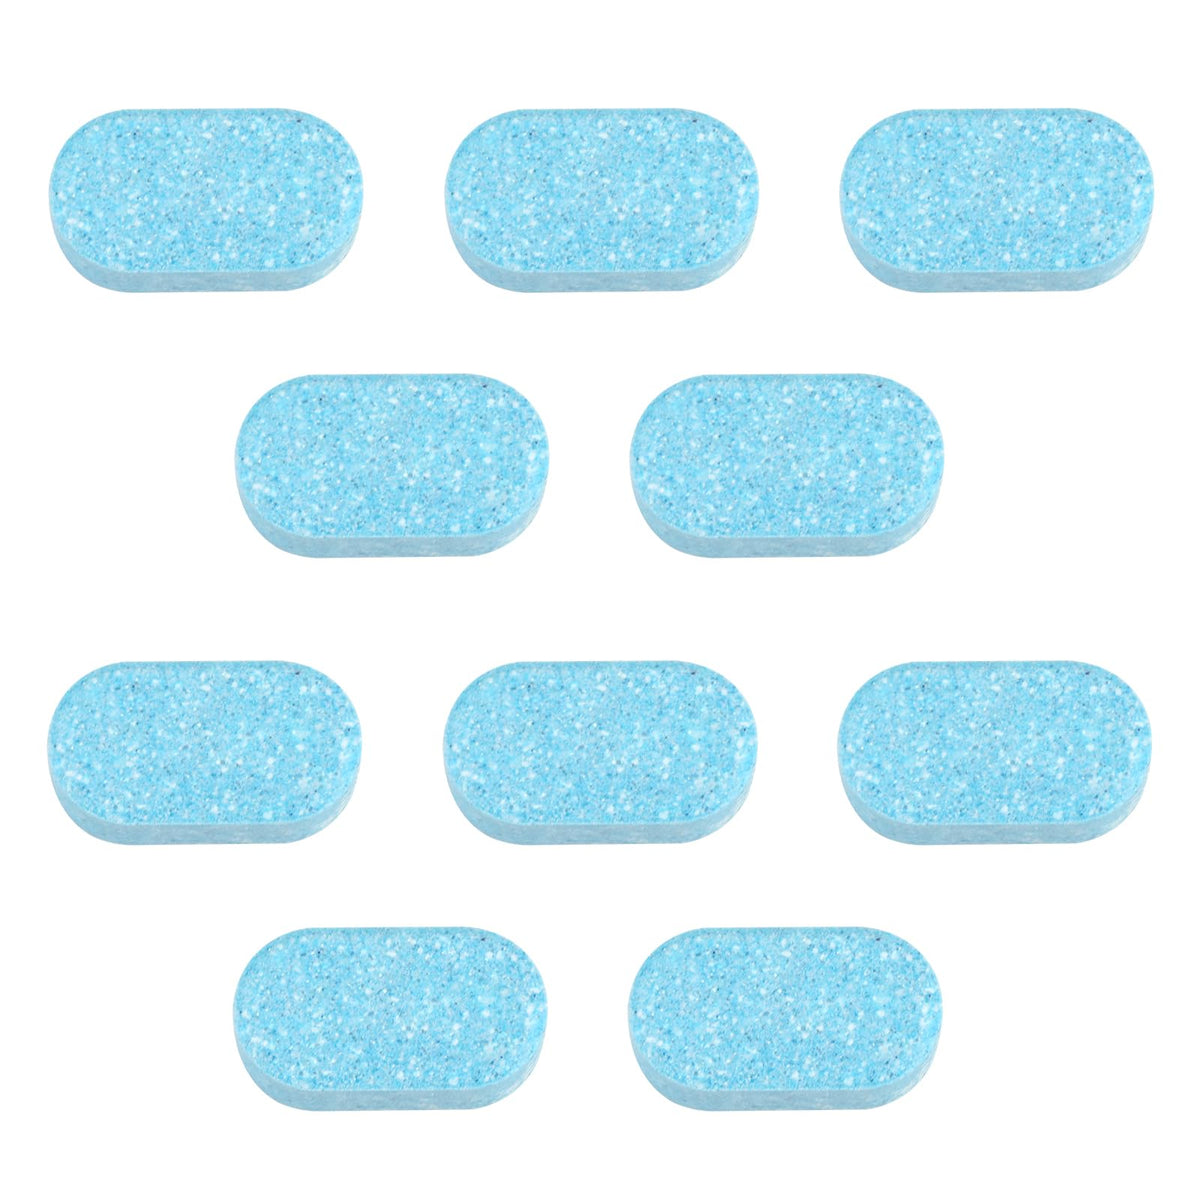 10 Pcs Scent Foaming Hand Soap Refill Tablets, Eco-friendly Effervescent Liquid Soap Tabs for Kitchen Bathroom, Plastic Free Wash Pods Sustainable Hand Foam Wash Refill Tablets (OCEAN Scent)